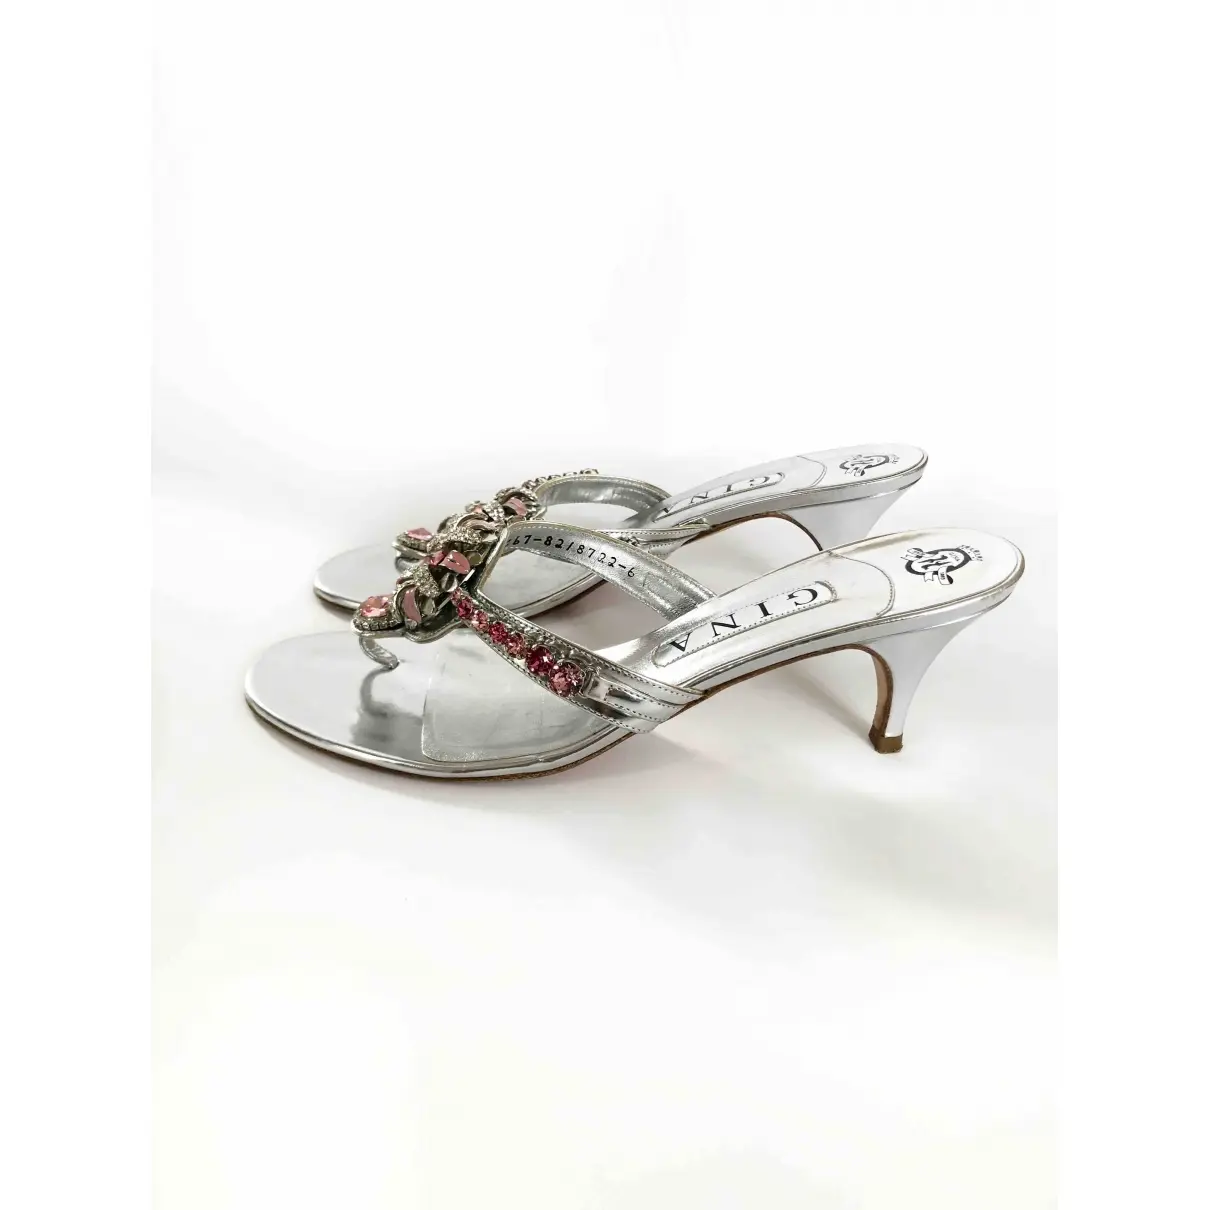 Buy Gina Patent leather sandal online